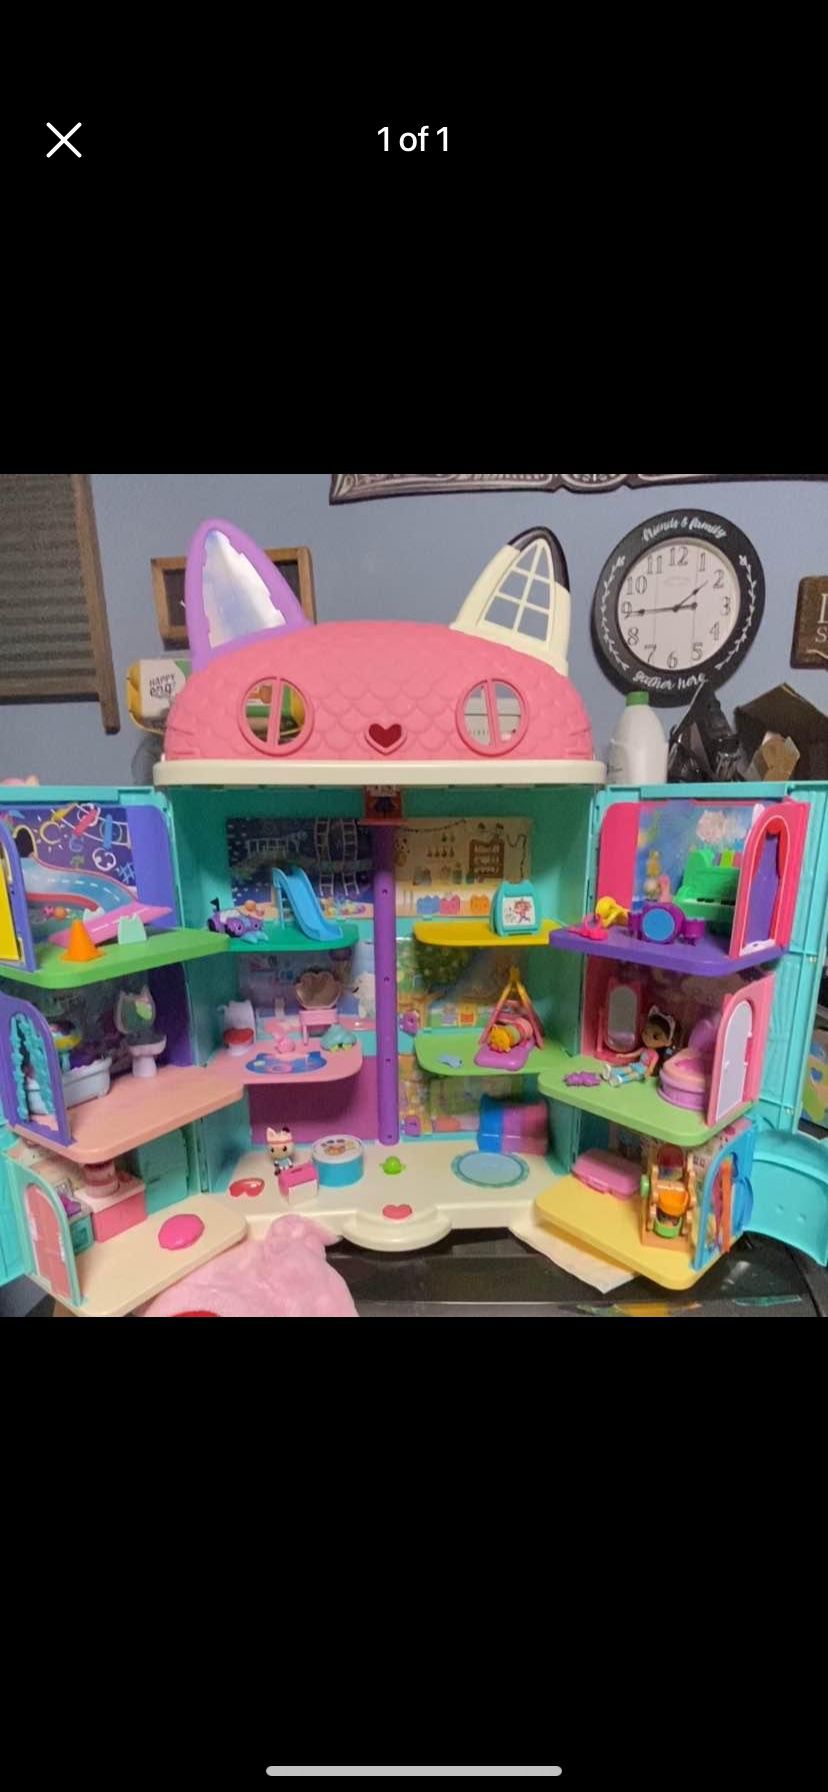 Gabby’s Doll House With 6 Bonus Room And All Accessories Incl